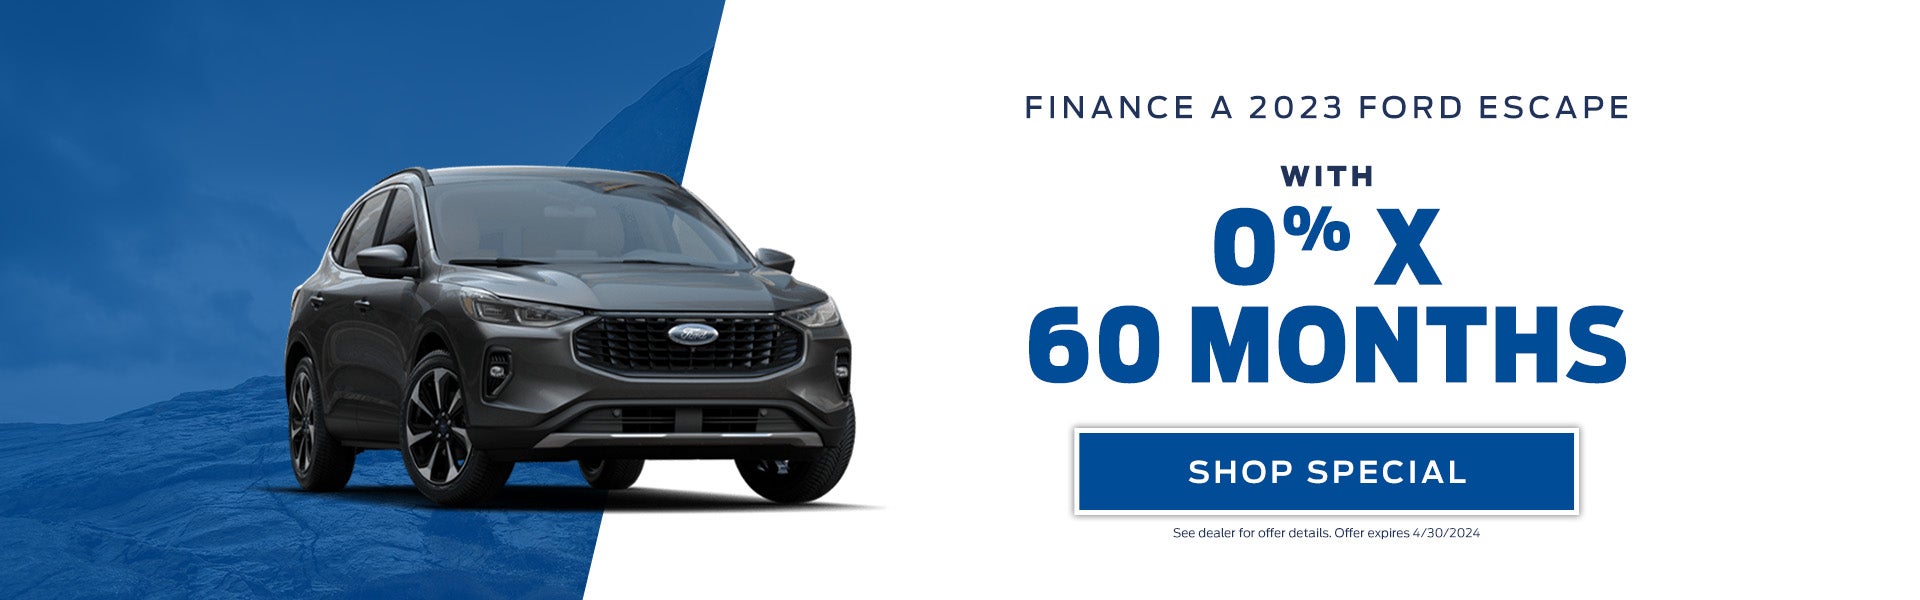 Finance a 2023 Ford Escape with 0% X 60 Months 